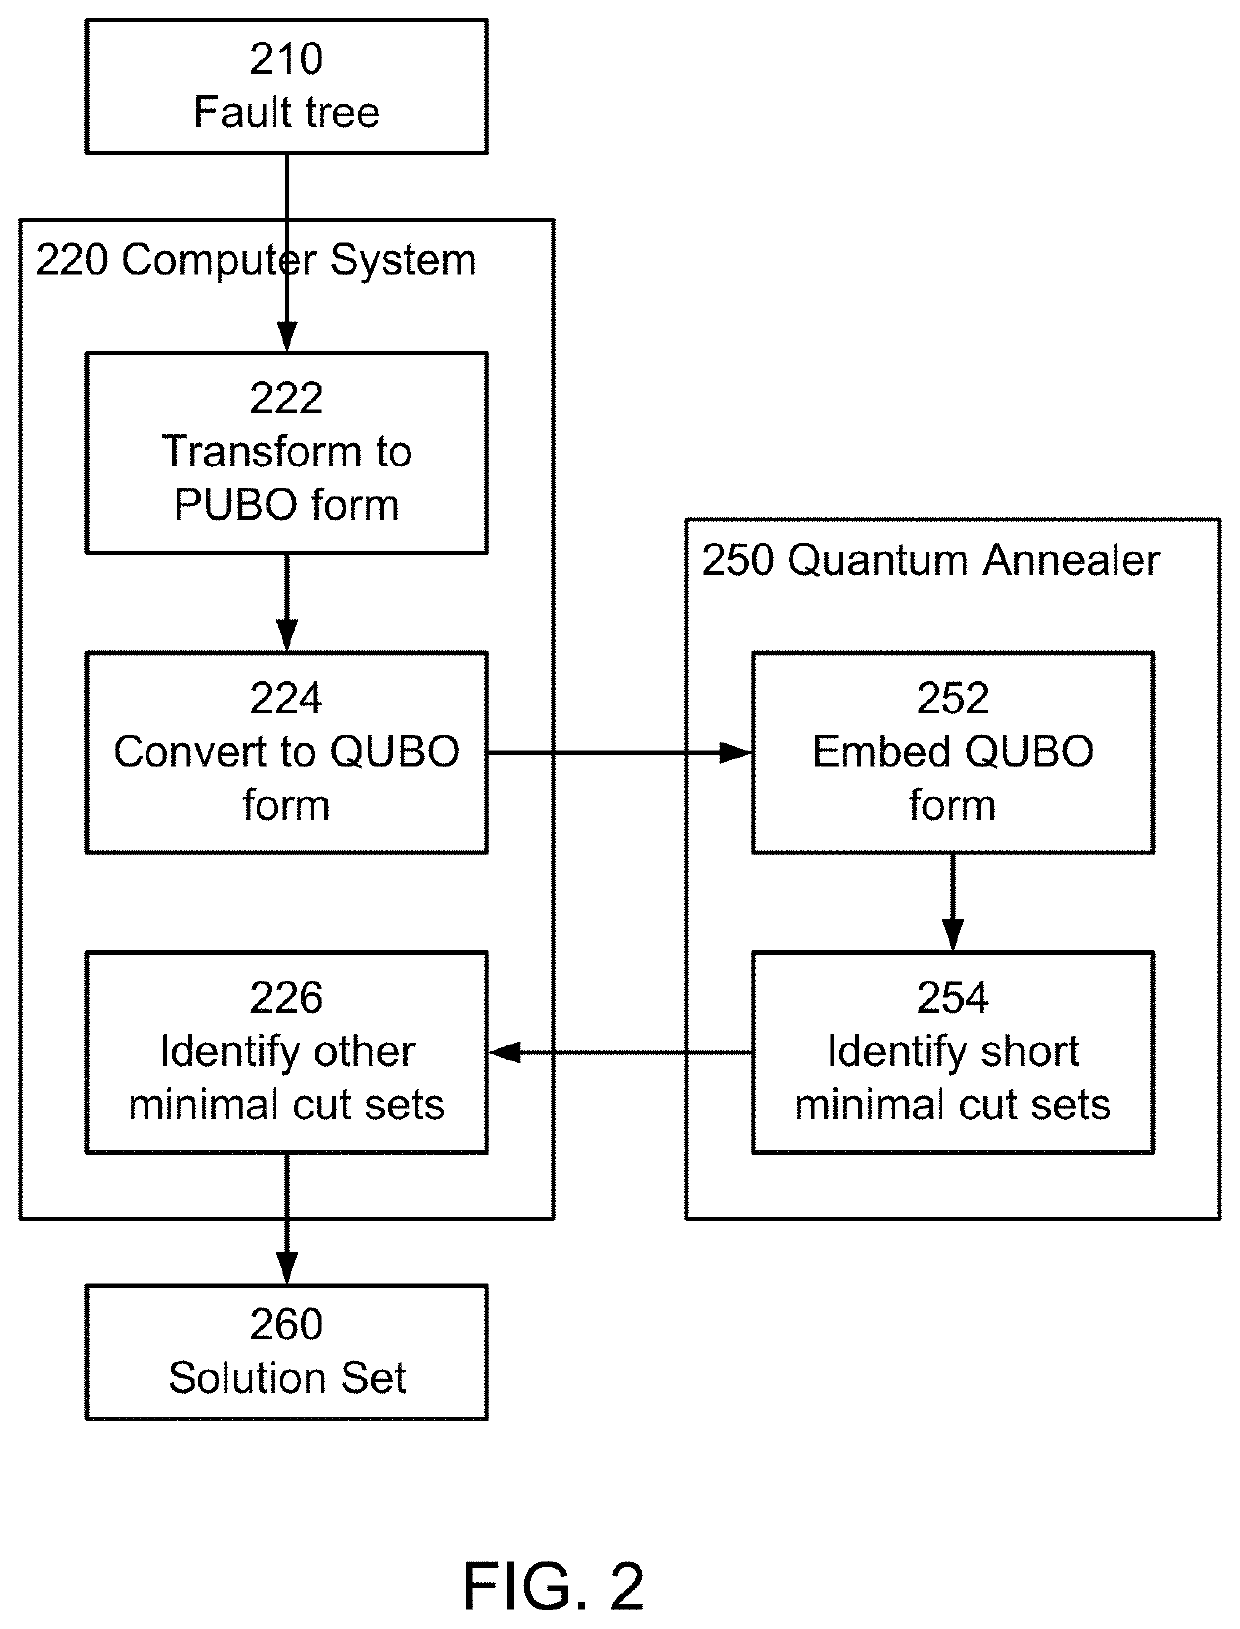 Performing fault tree analysis on quantum computers